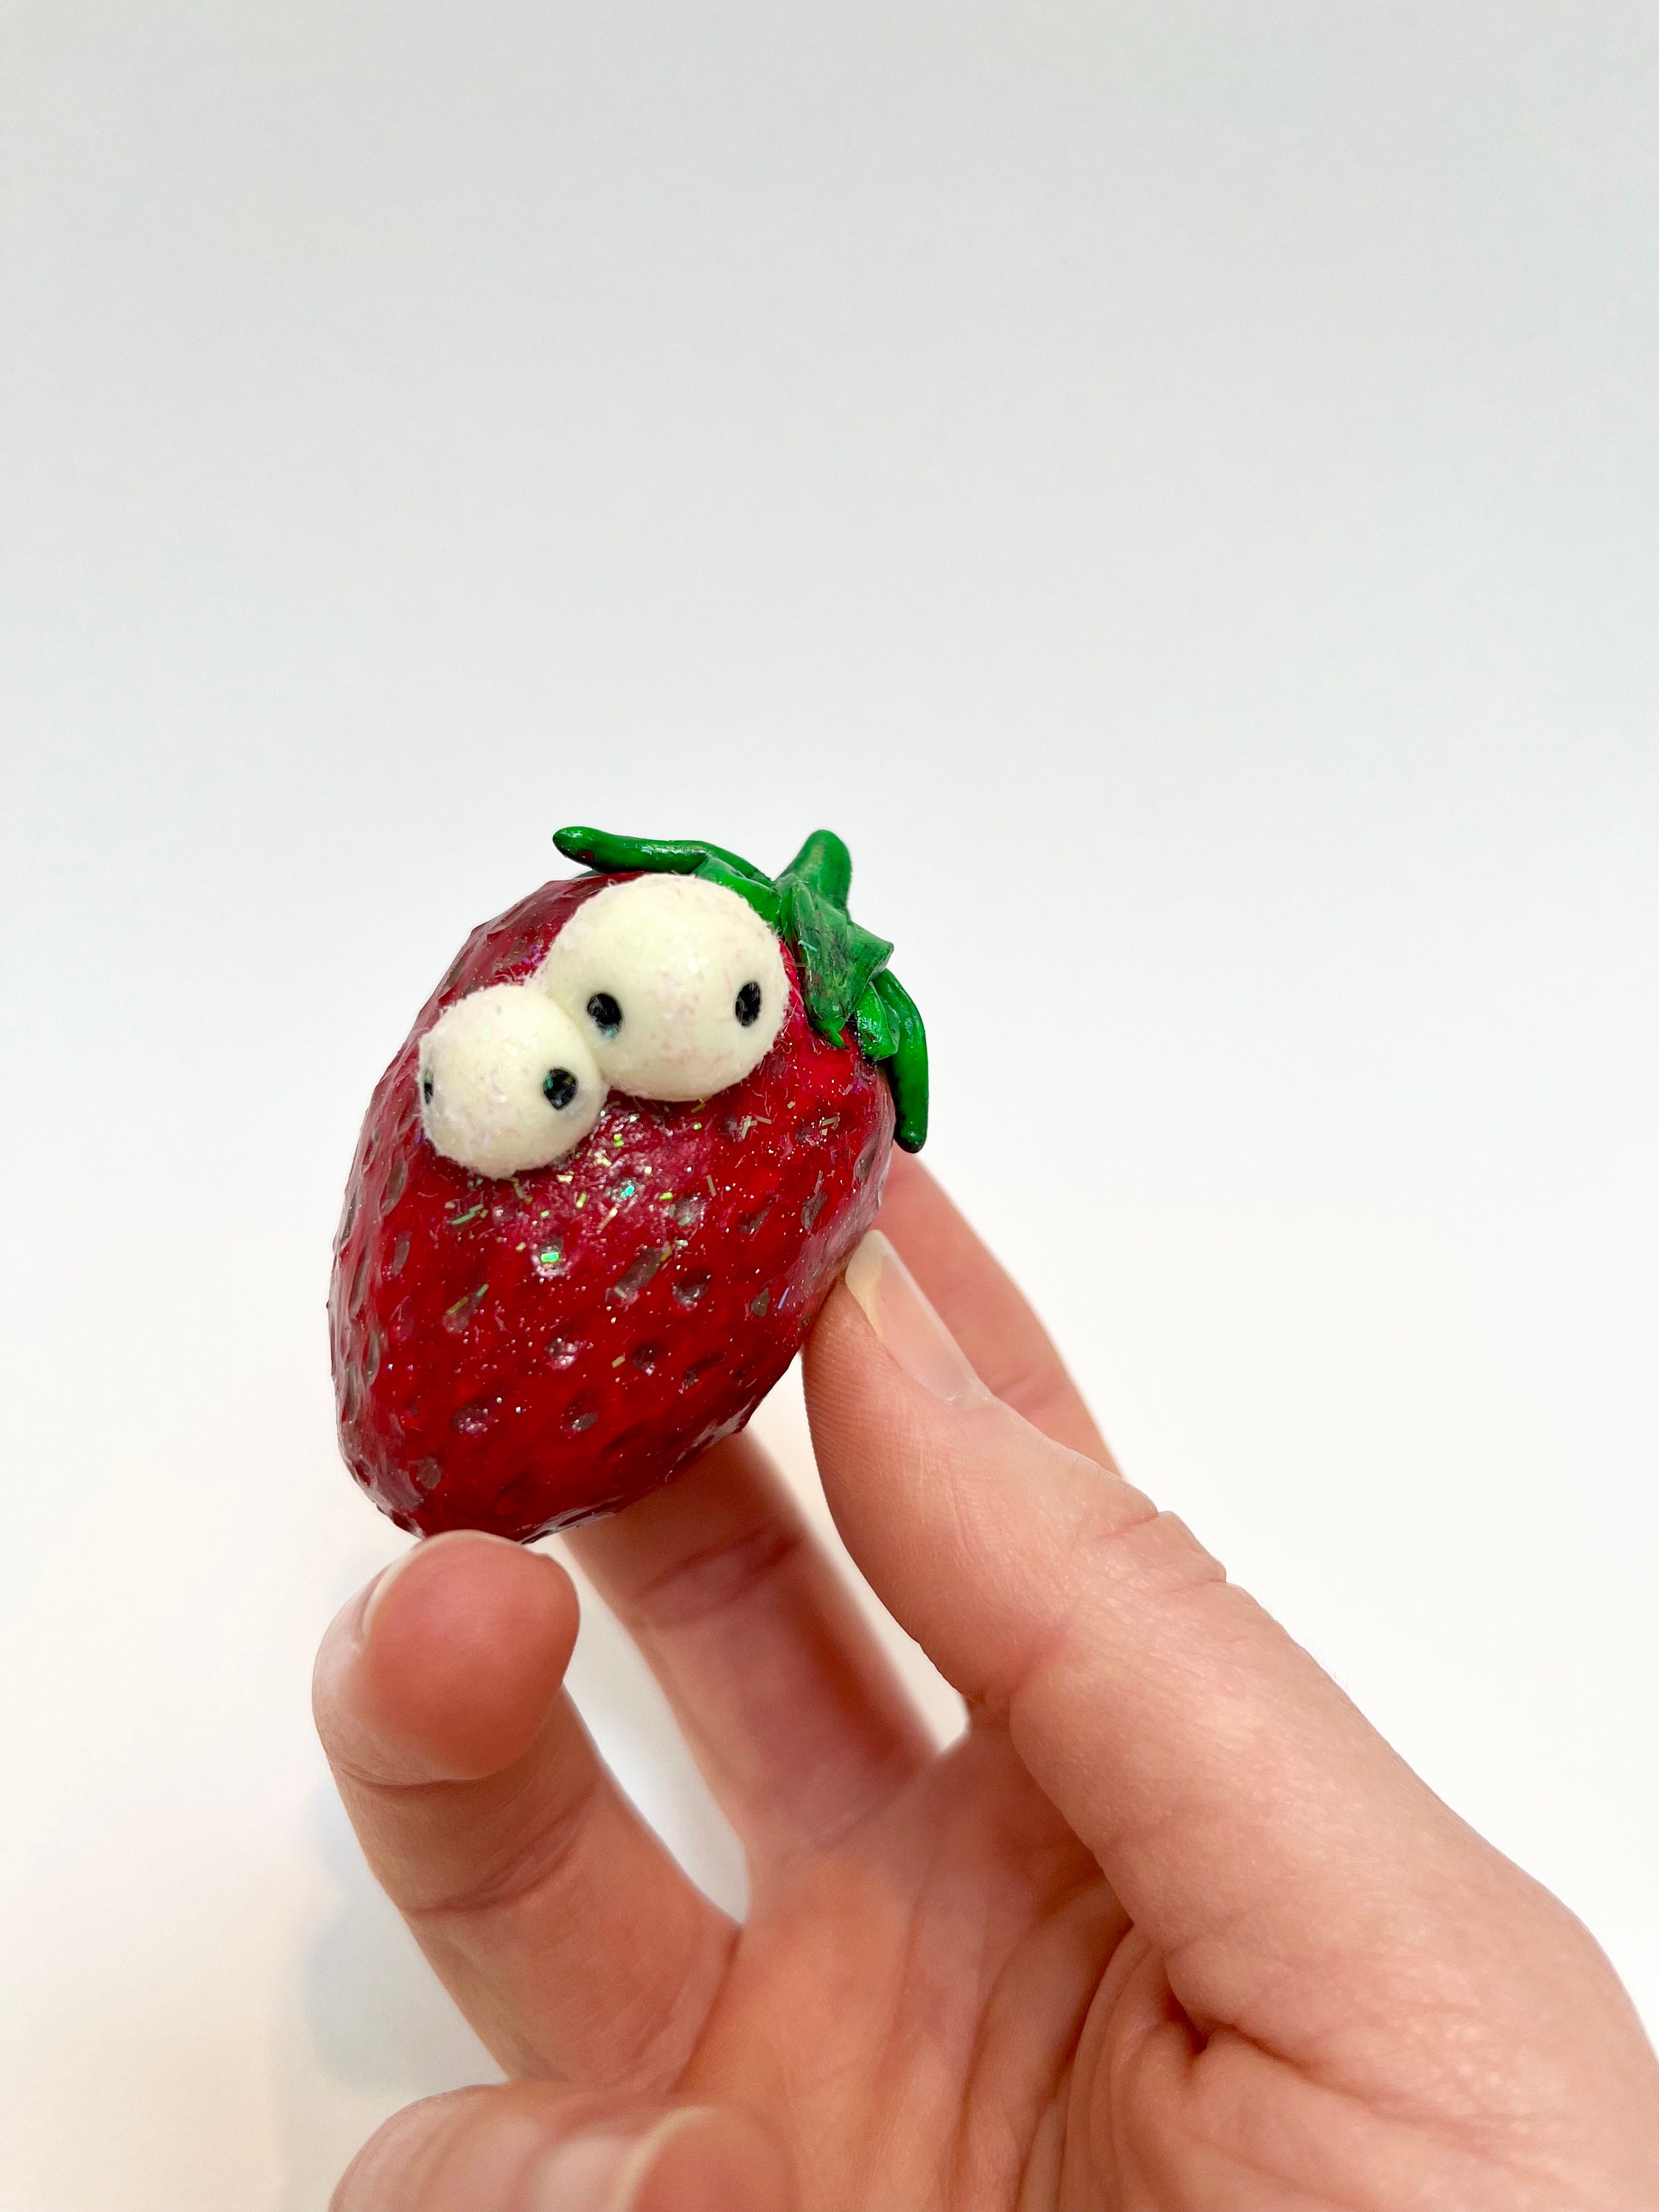 The mold on this strawberry is smiling at me. : r/pics